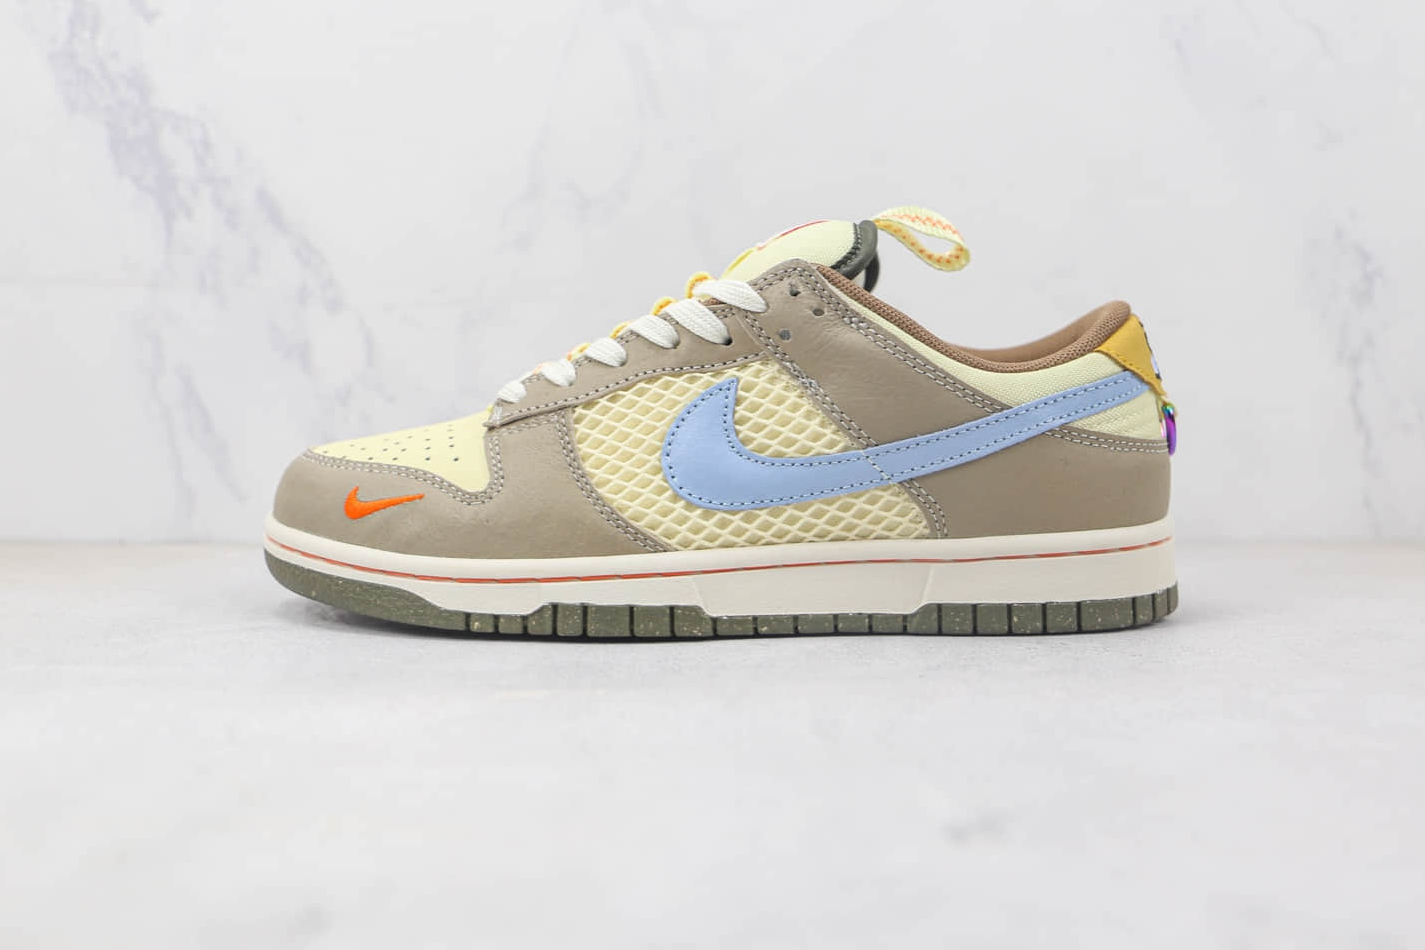 Nike Dunk Low 'Cartoon' DX6038-741 - Retro-Inspired Sneakers | Limited Edition